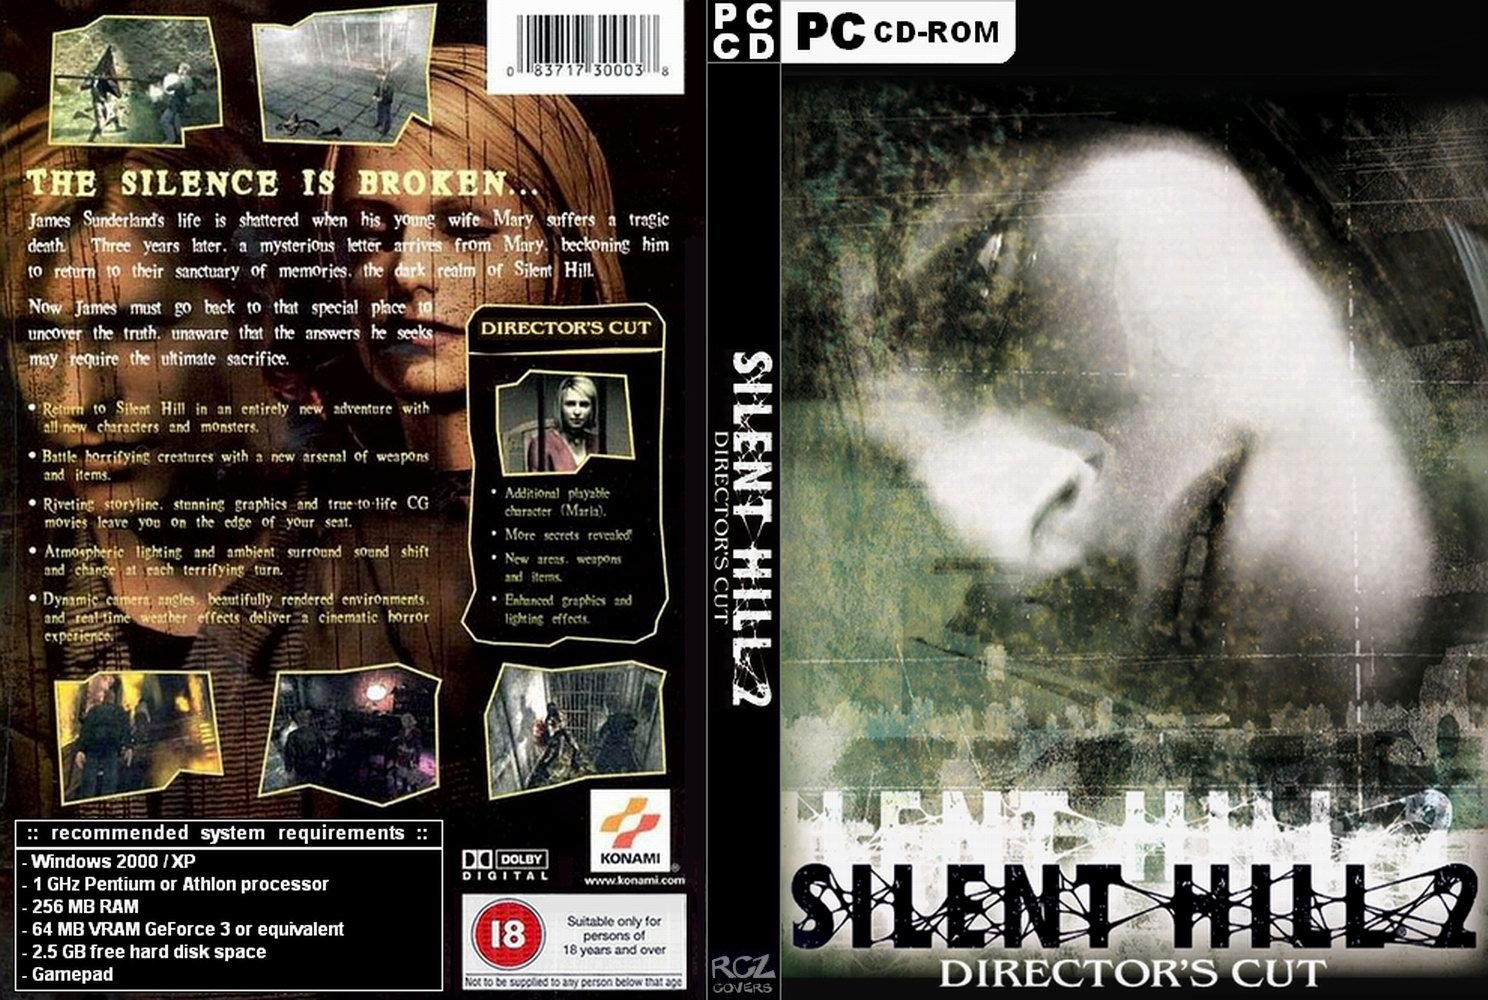 Amazoncom: Silent Hill 2 - PC: Video Games